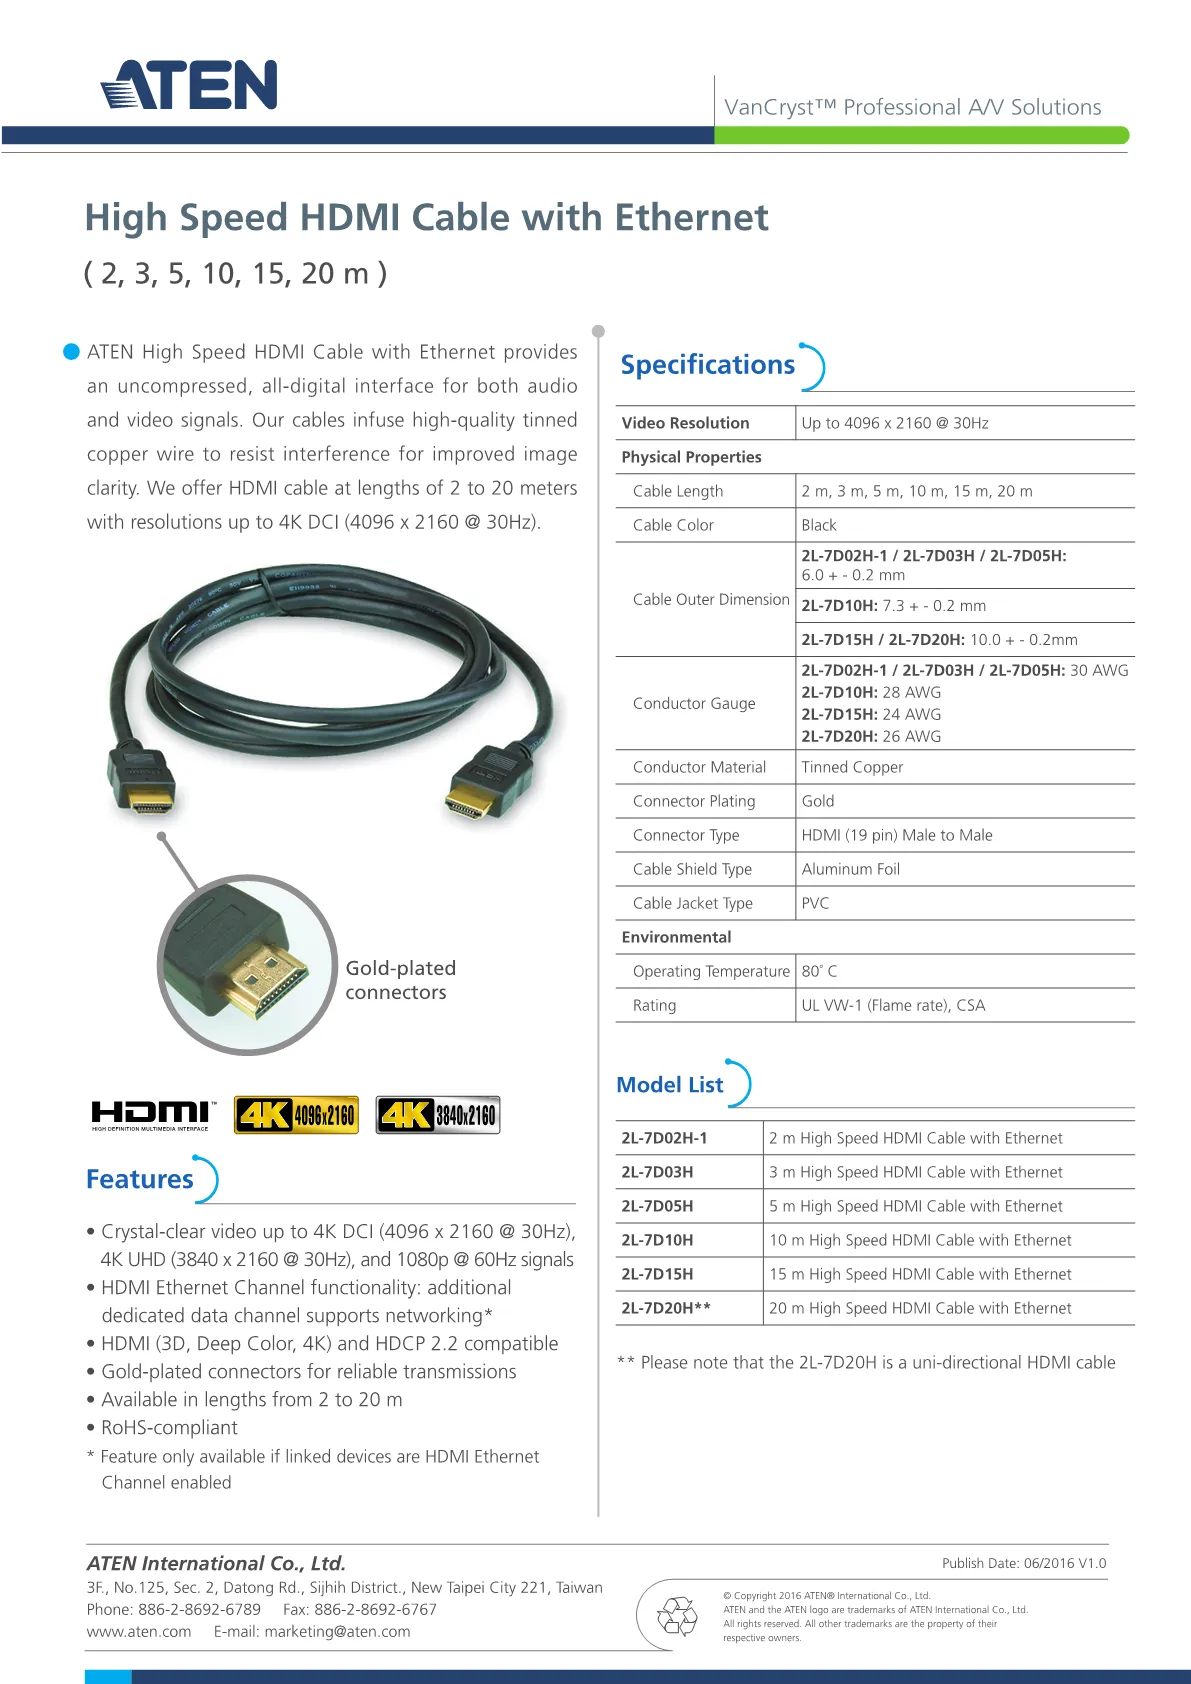  ATEN 2L-7D15H 15 m High Speed HDMI Cable : Electronics